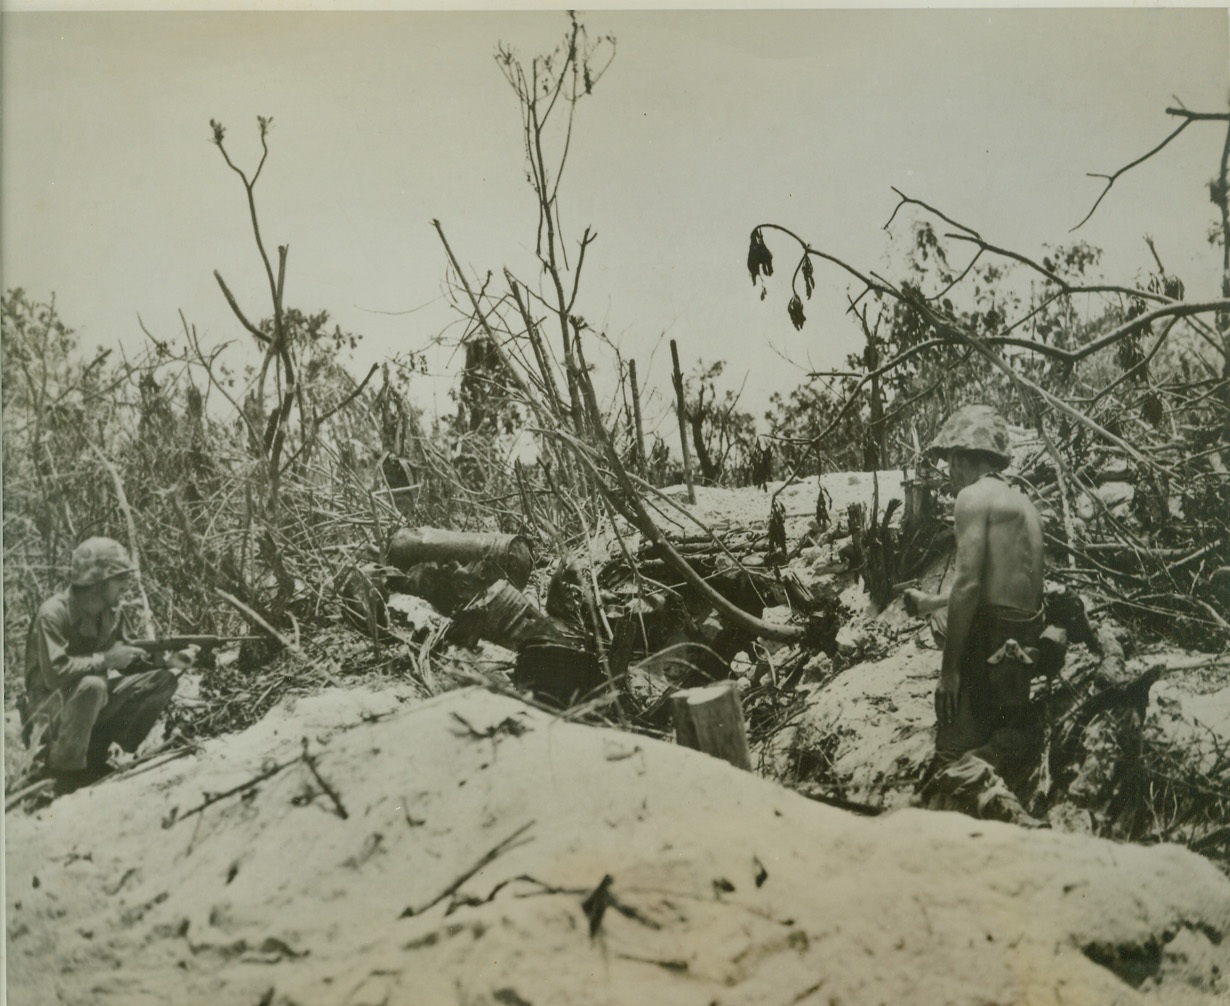 When Japs Get Stubborn, 10/2/1944. PELELIU ISLAND, PALAU -- Cautiously advancing on a Jap pillbox on Peleliu, two Marines order the enemy soldiers inside to surrender. When the Japs refused, the Leathernecks were left with but one alternative -- to blow them out.  Credit: (Marine Corps Photo from ACME);